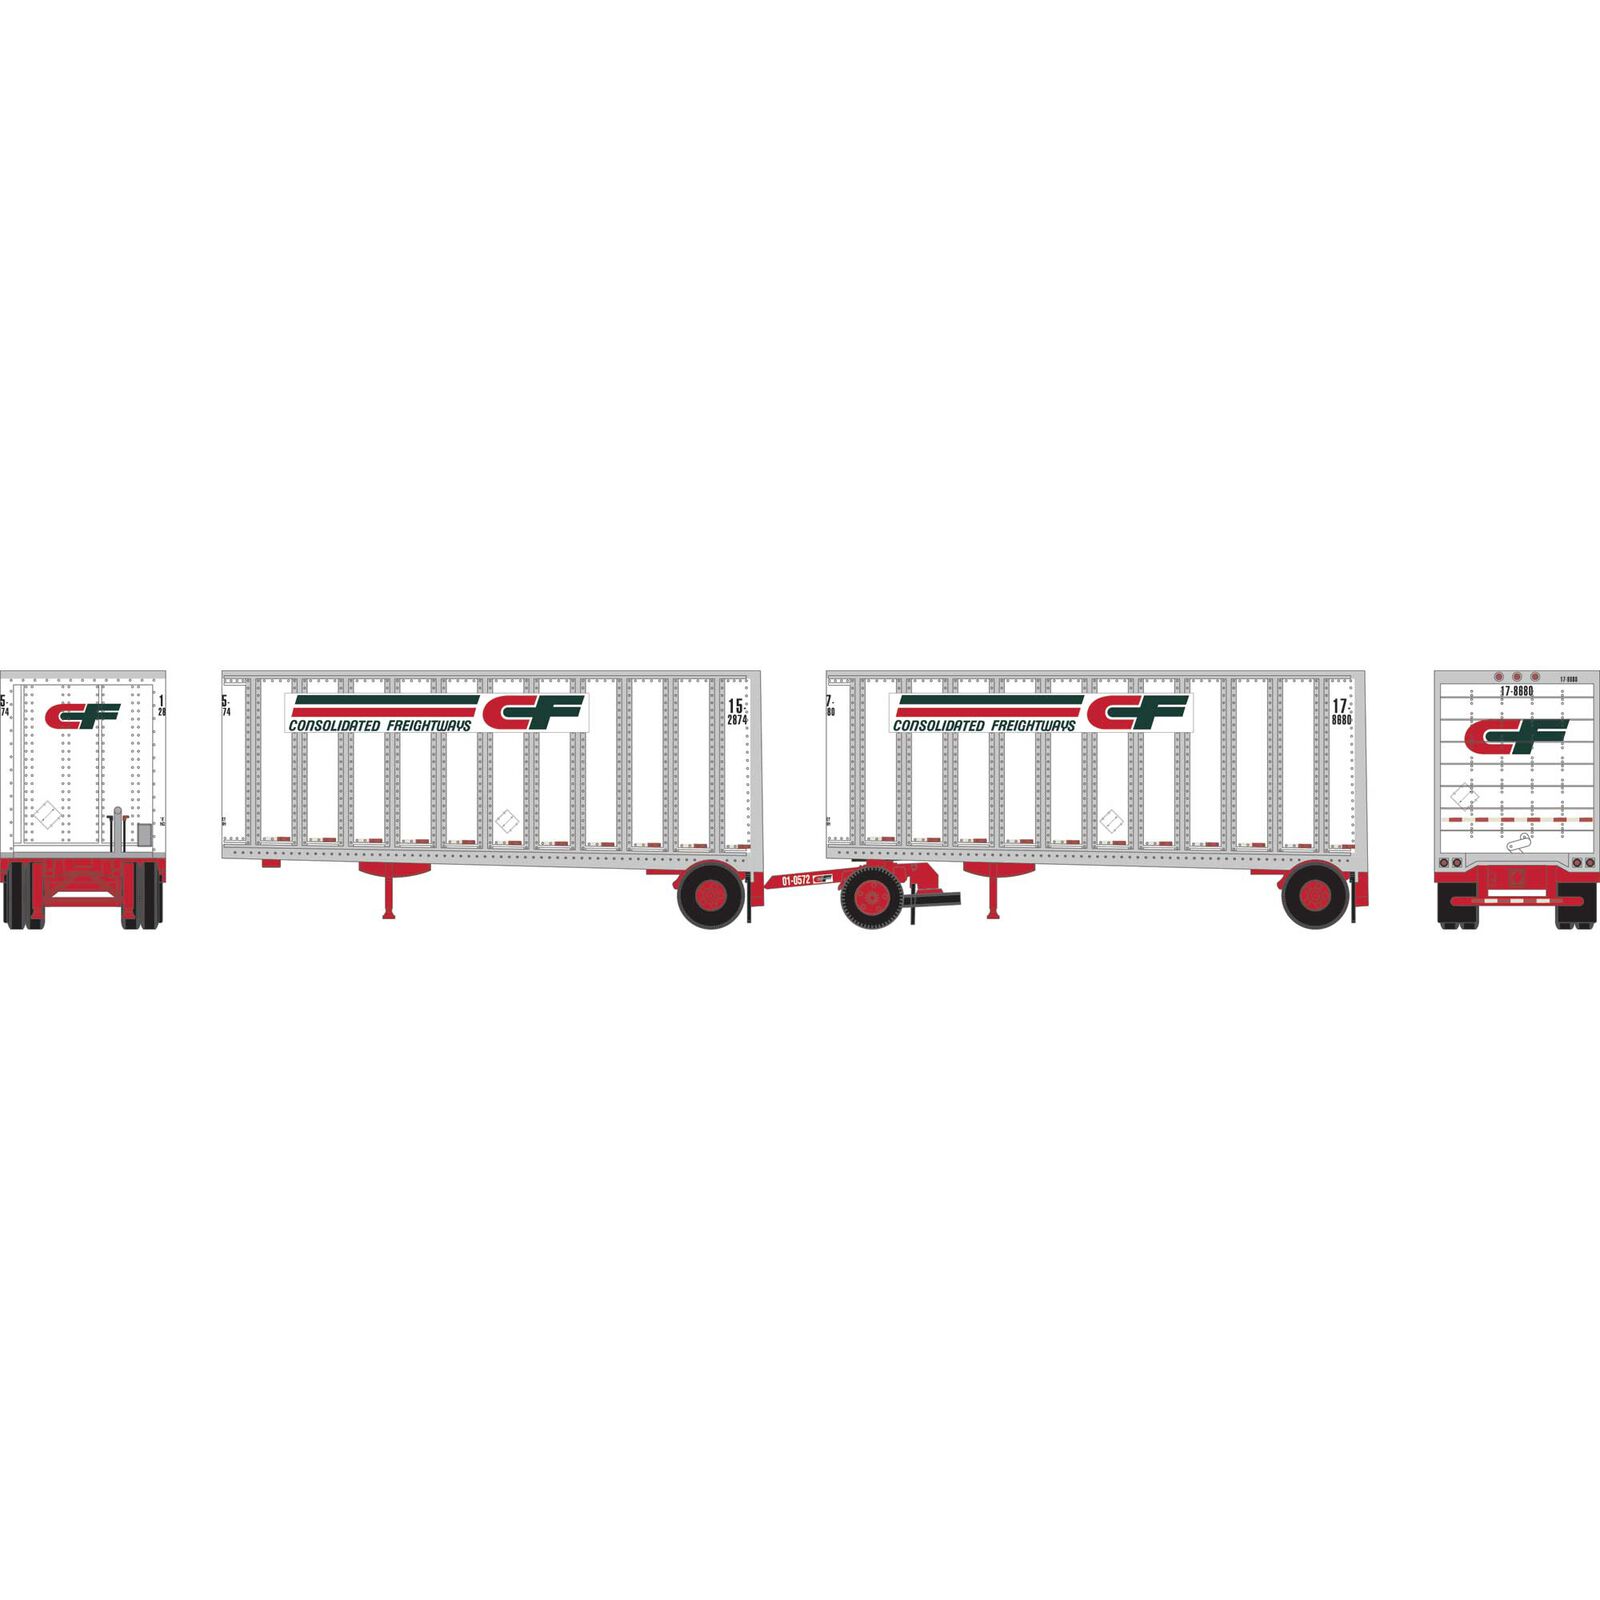 N ATH 28' Wedge Trailers Ext. Post (2) with Dolly, Consolidated Freight- Trailers: 15-2874/17-8680; Dolly: 01-0572